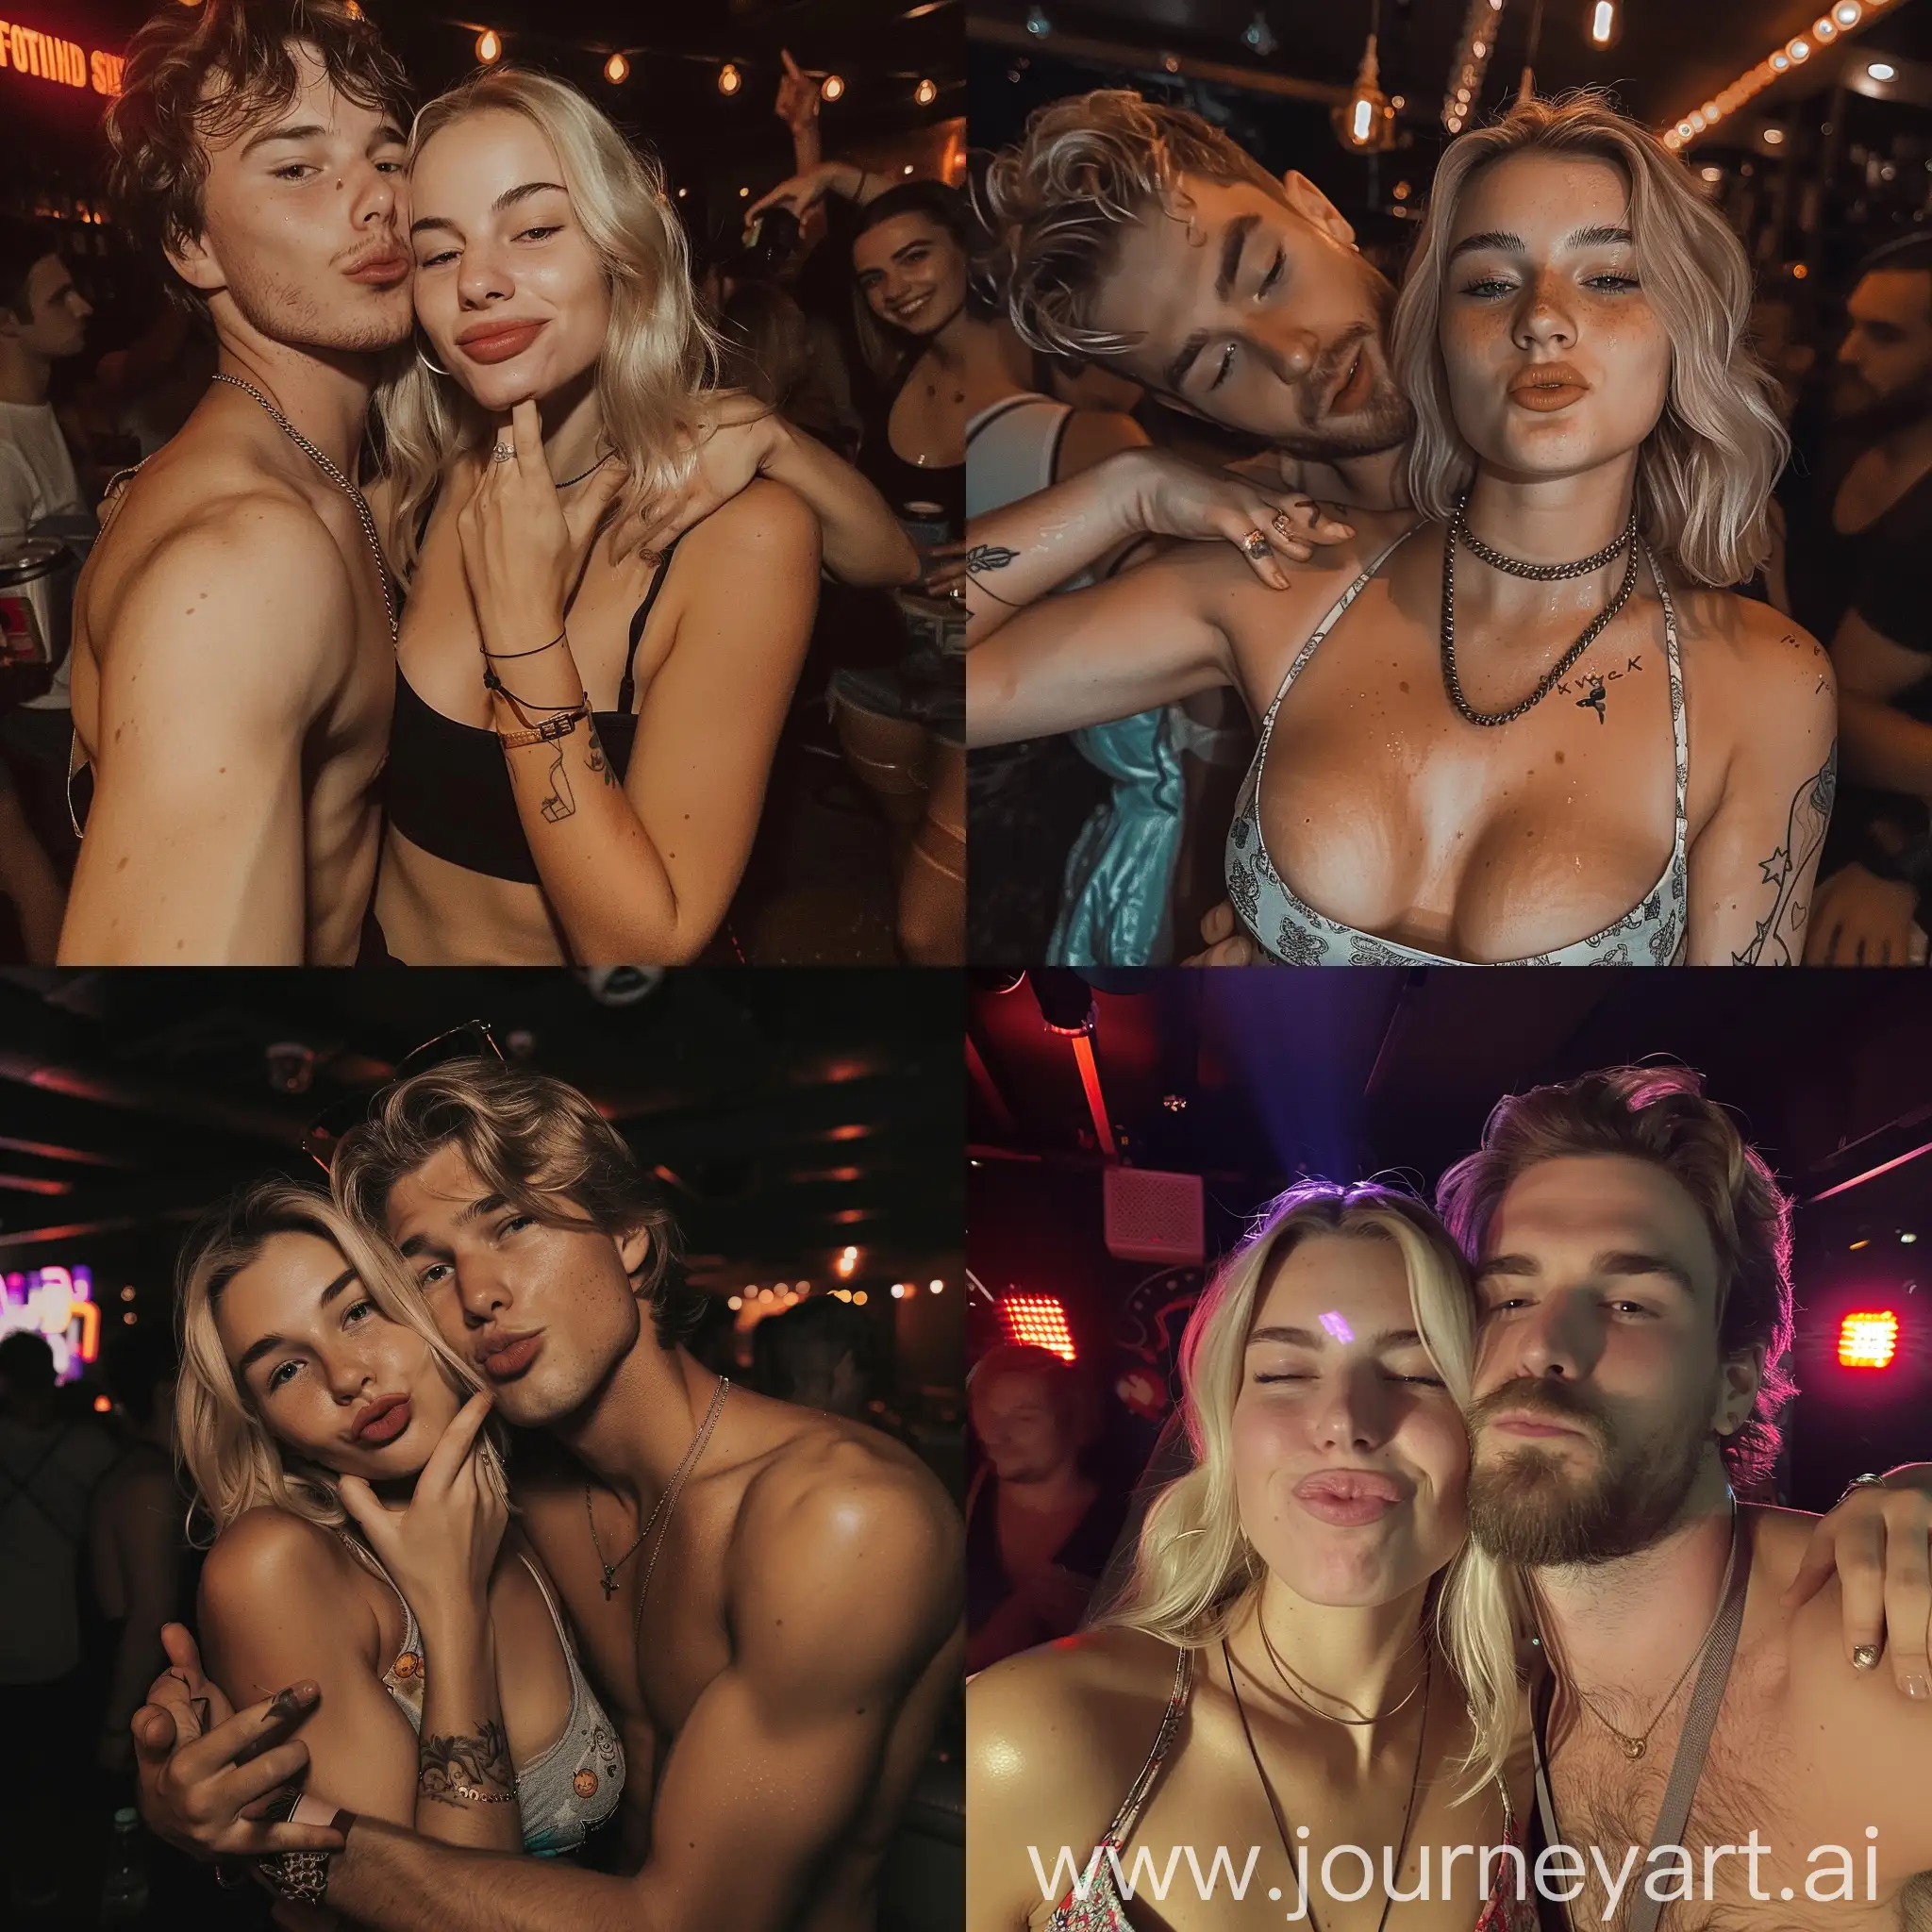 Sweaty-and-Flirty-Blonde-Woman-and-Partner-in-Party-Club